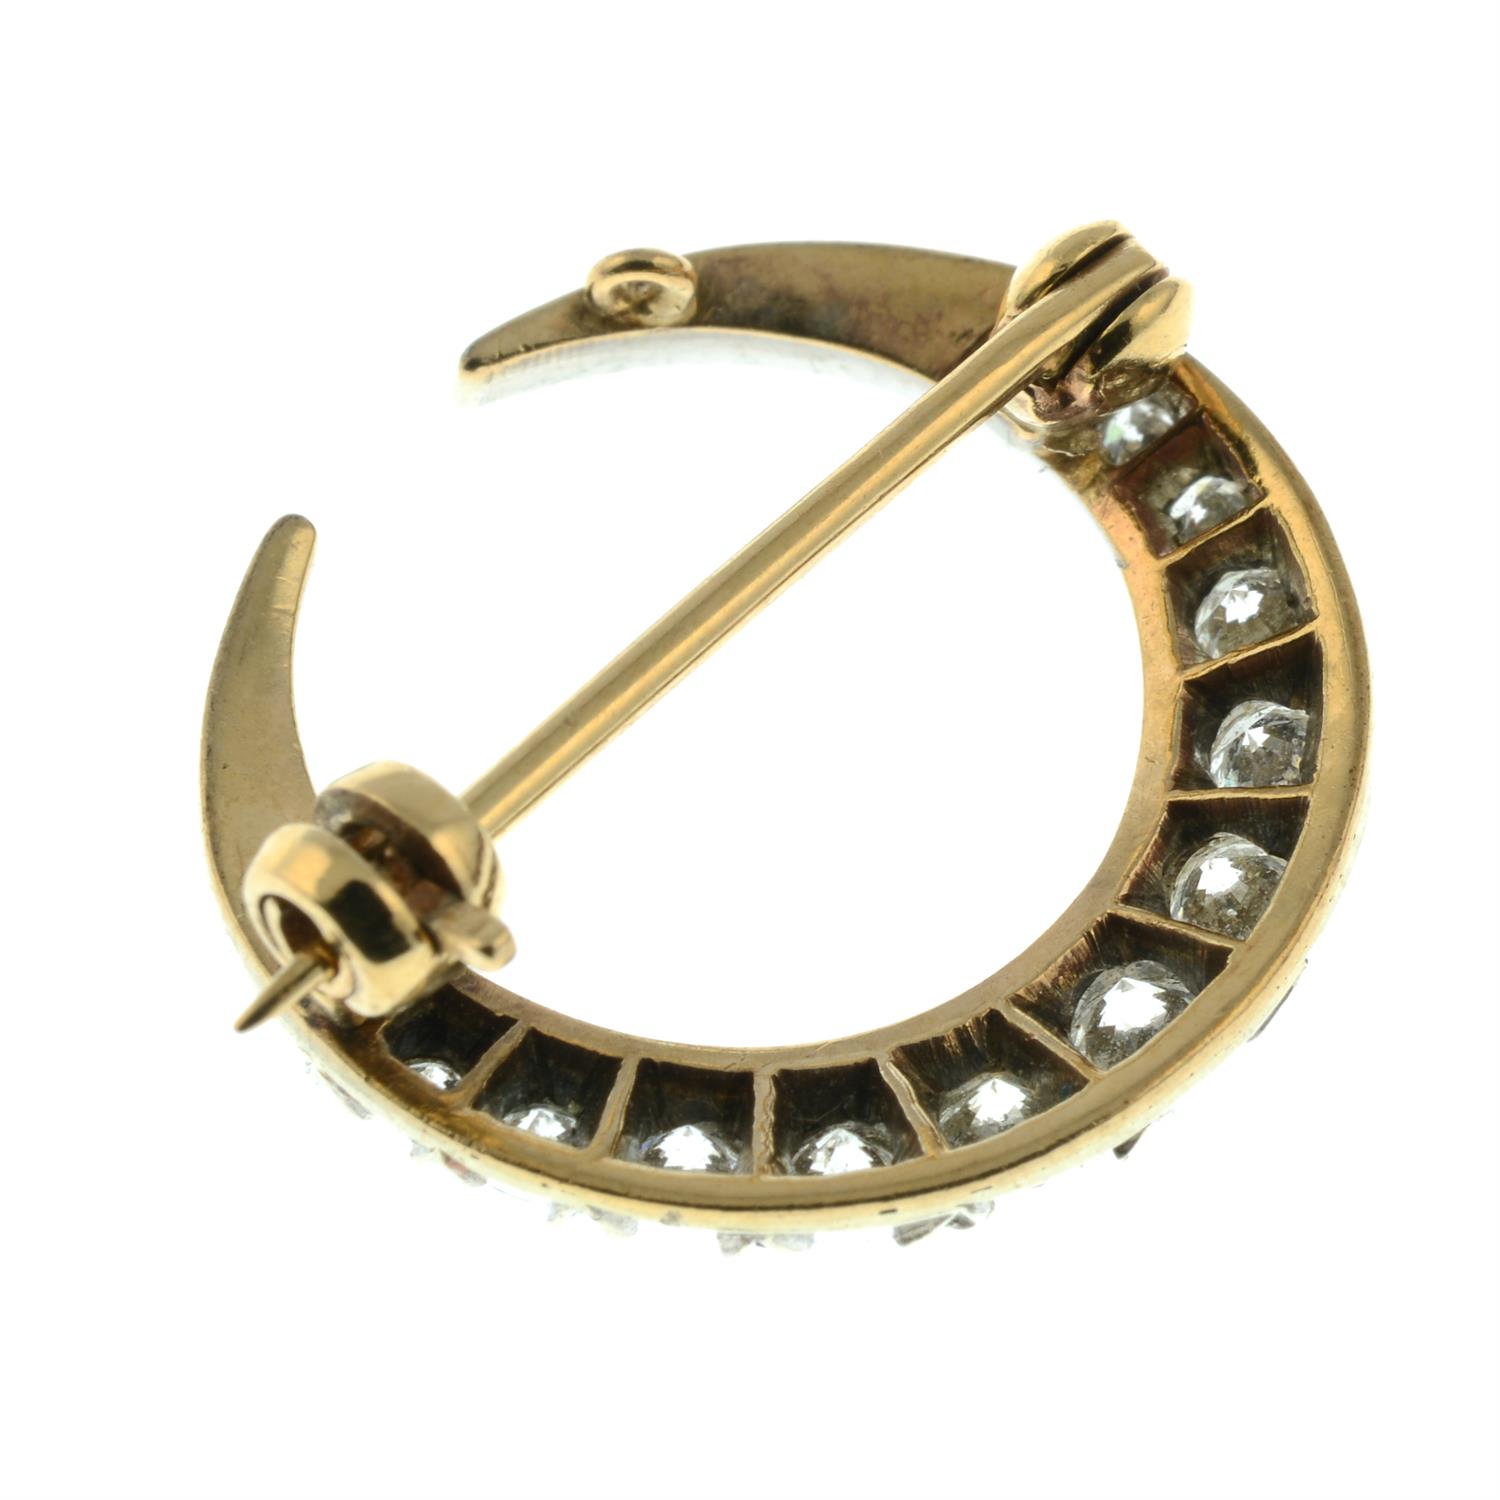 A brilliant and single-cut diamond crescent moon brooch. - Image 3 of 4